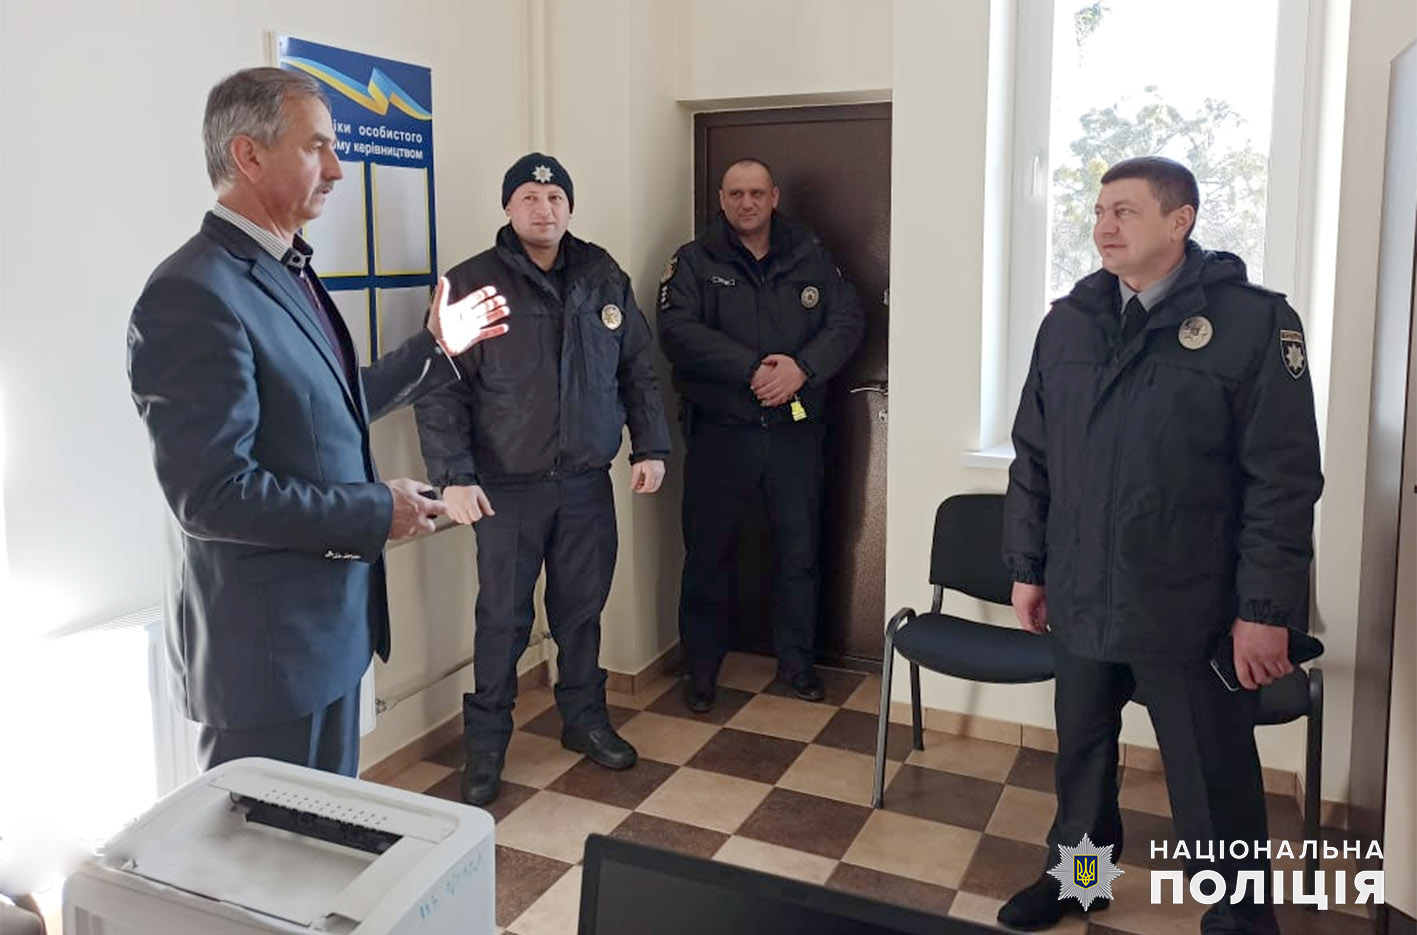 A Police Station has been Opened in the Pluzhnenska AH